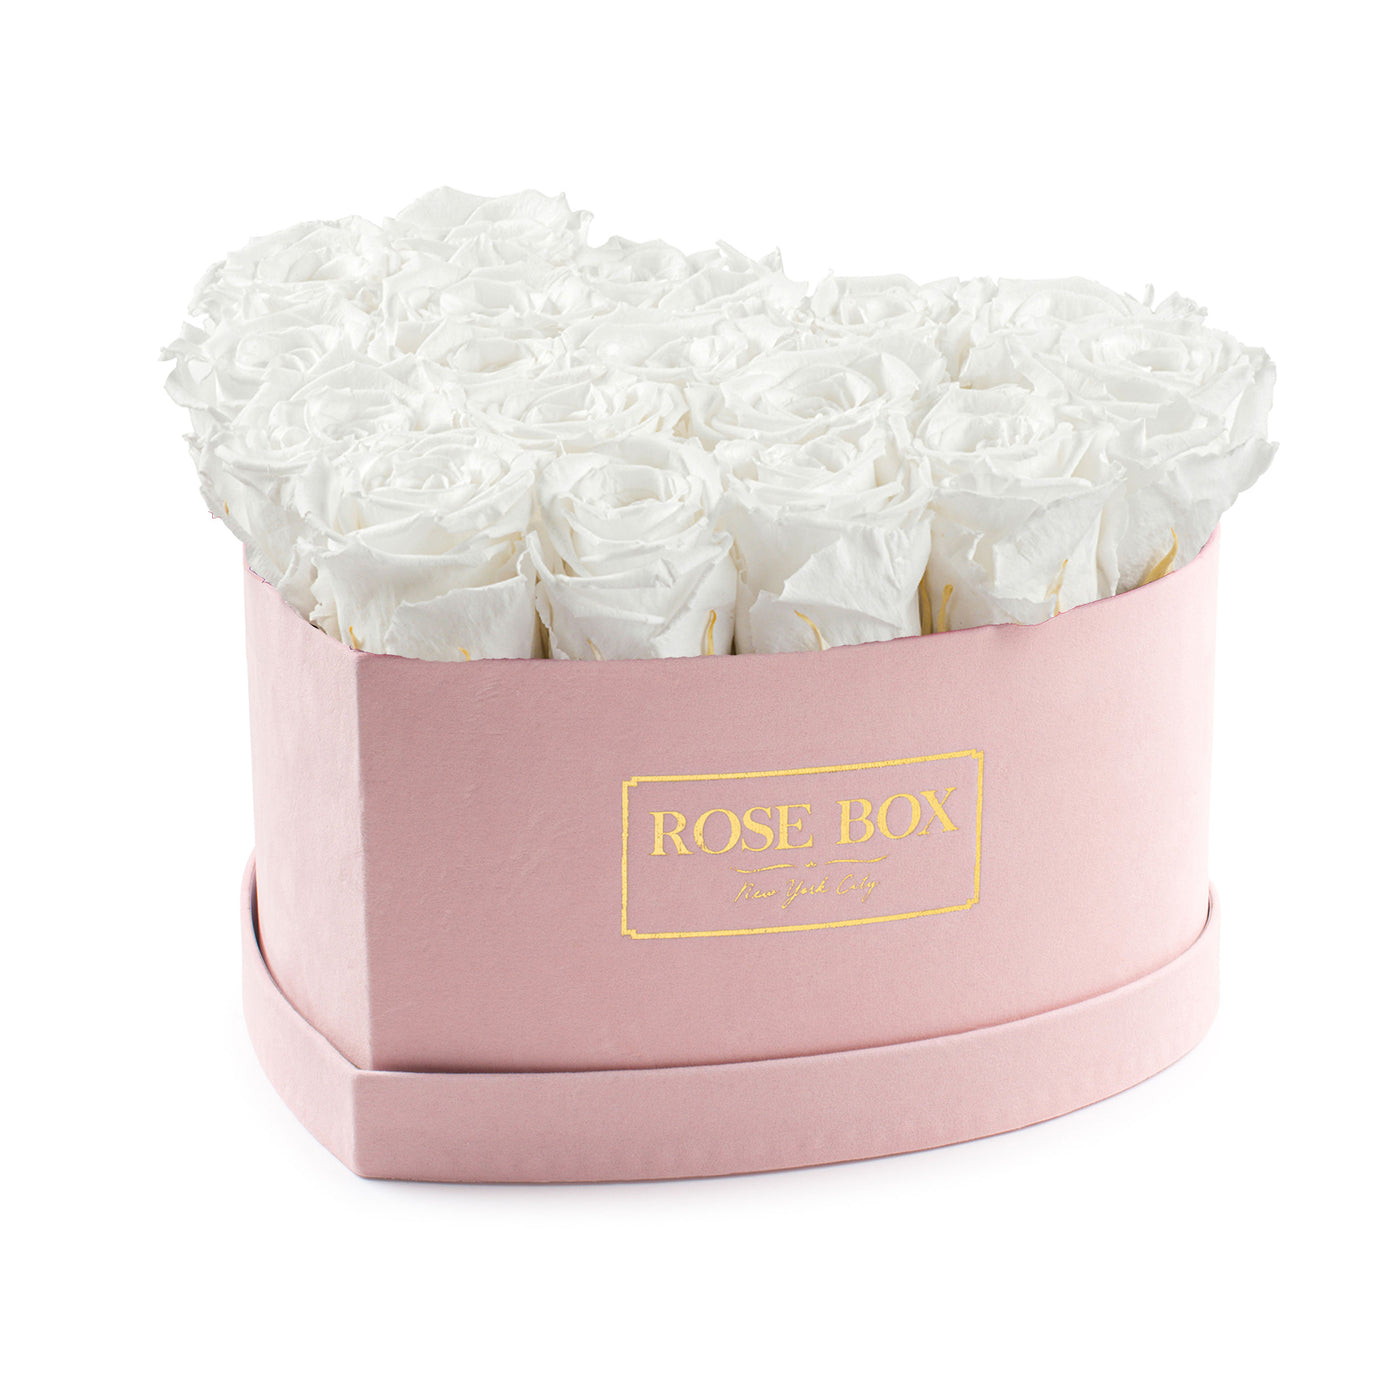 Large Pink Heart Box with Pure White Roses